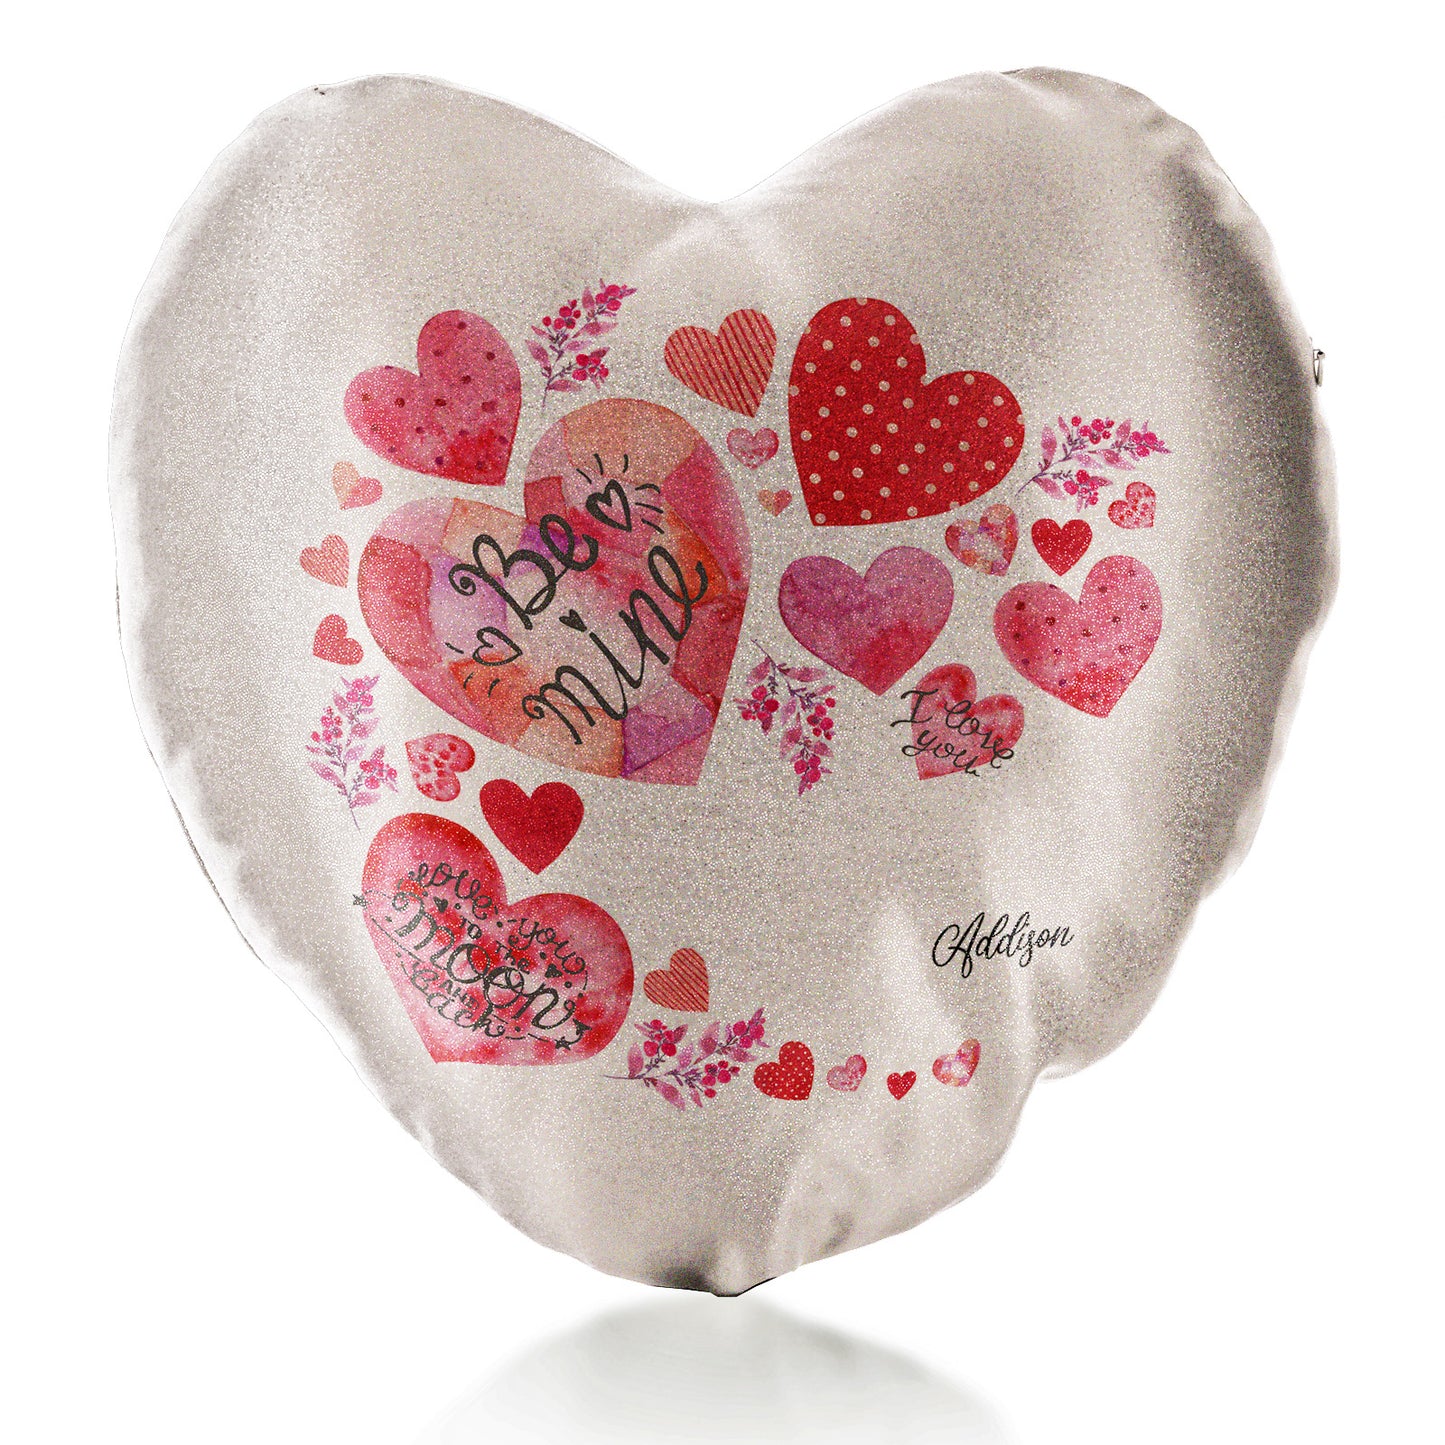 Personalised Glitter Heart Cushion with Stylish Text and Material Hearts Love Message Print